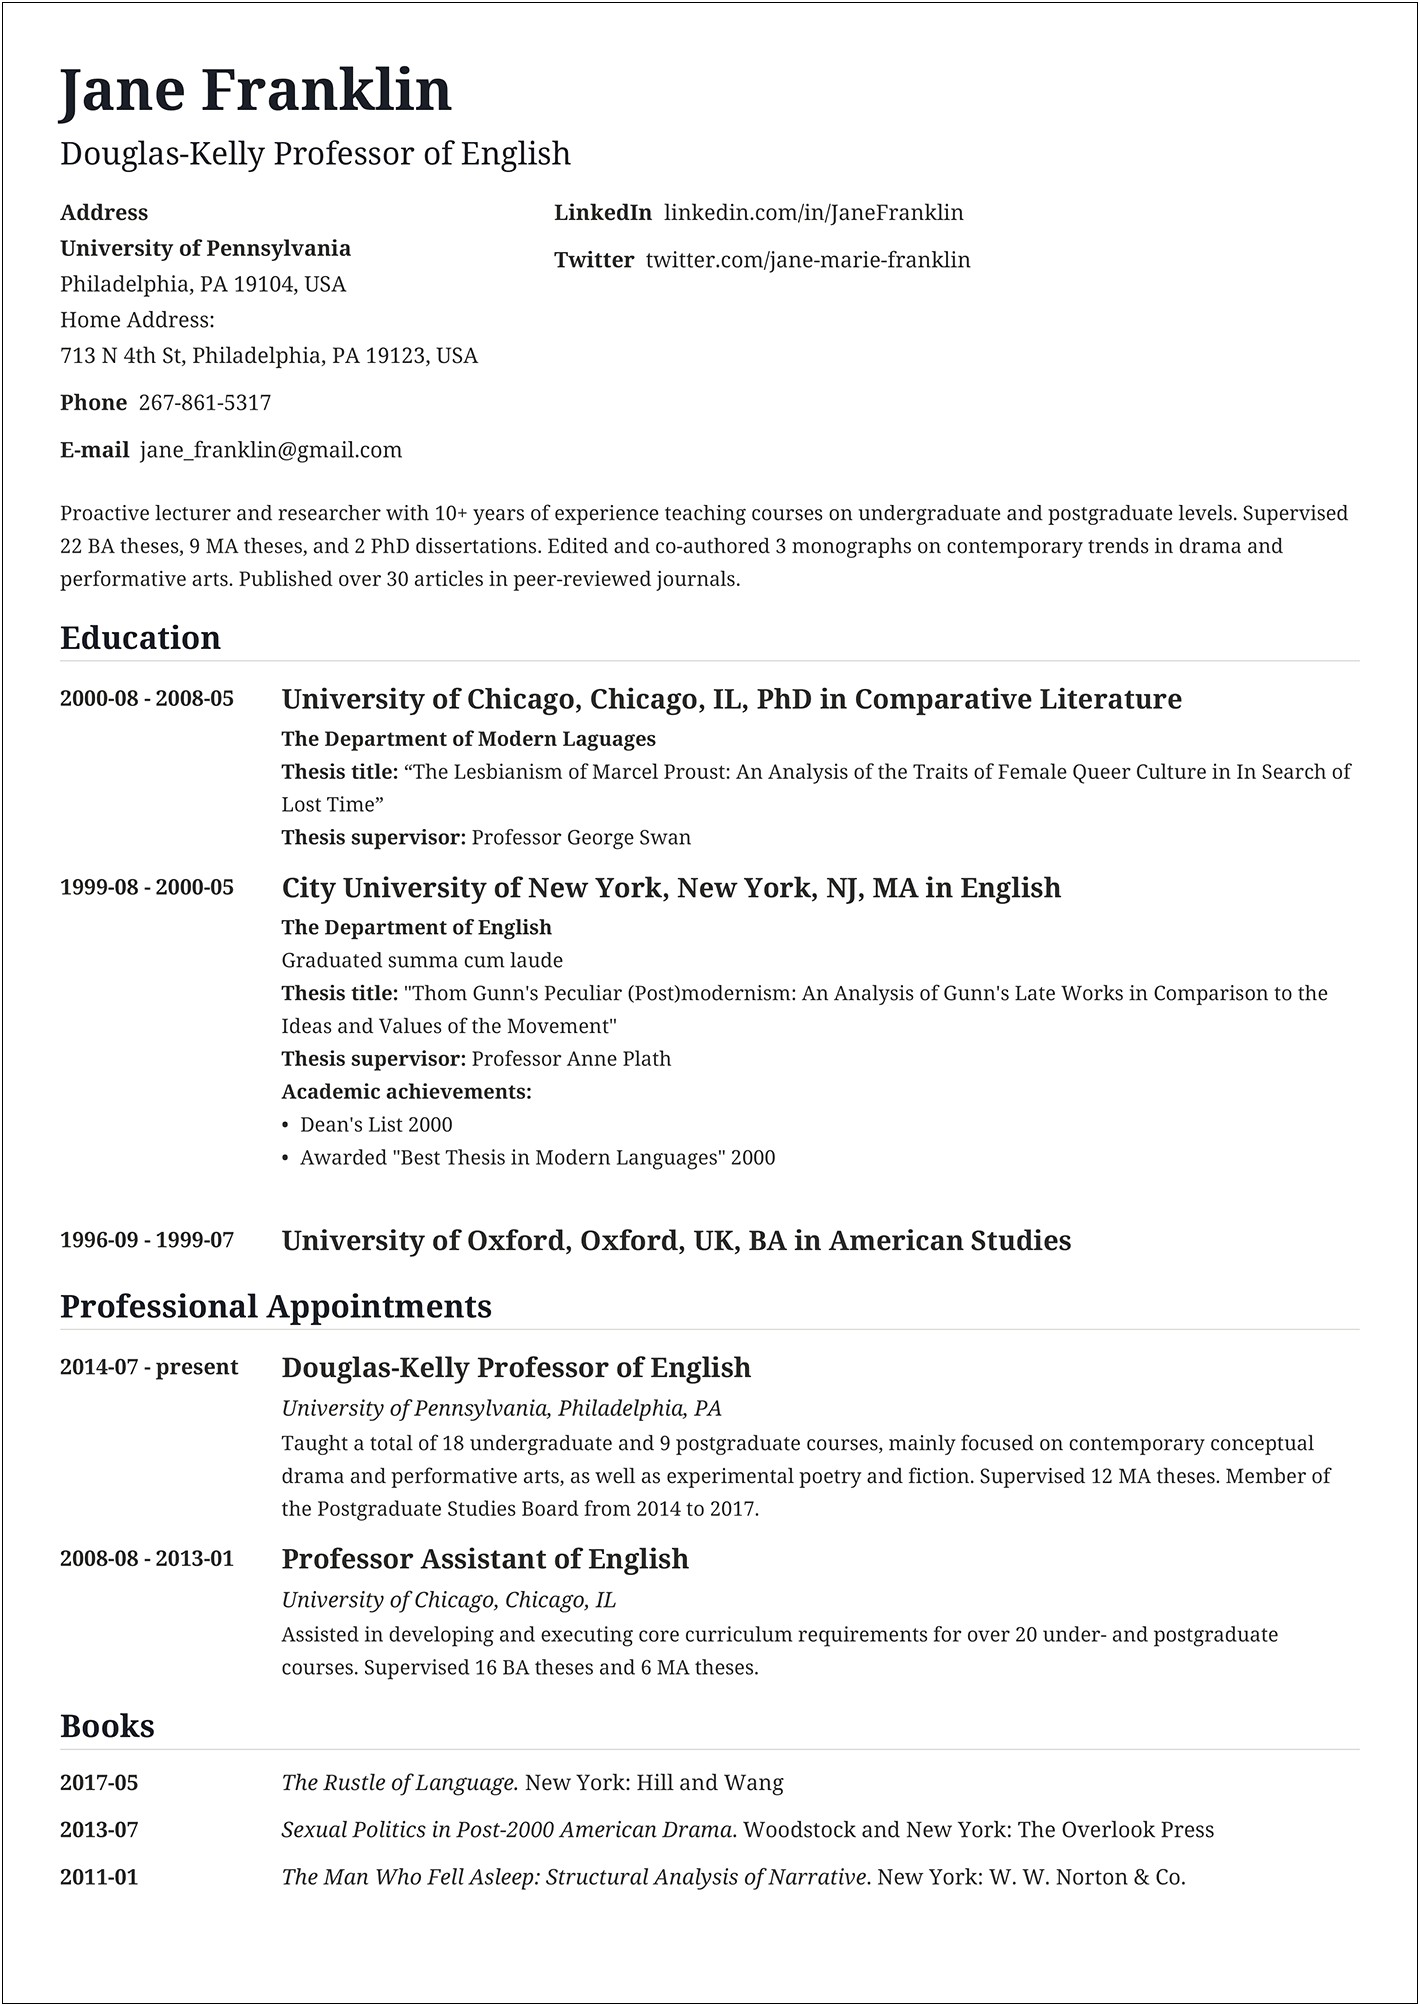 Resume Multiple Positions Same Company Examples